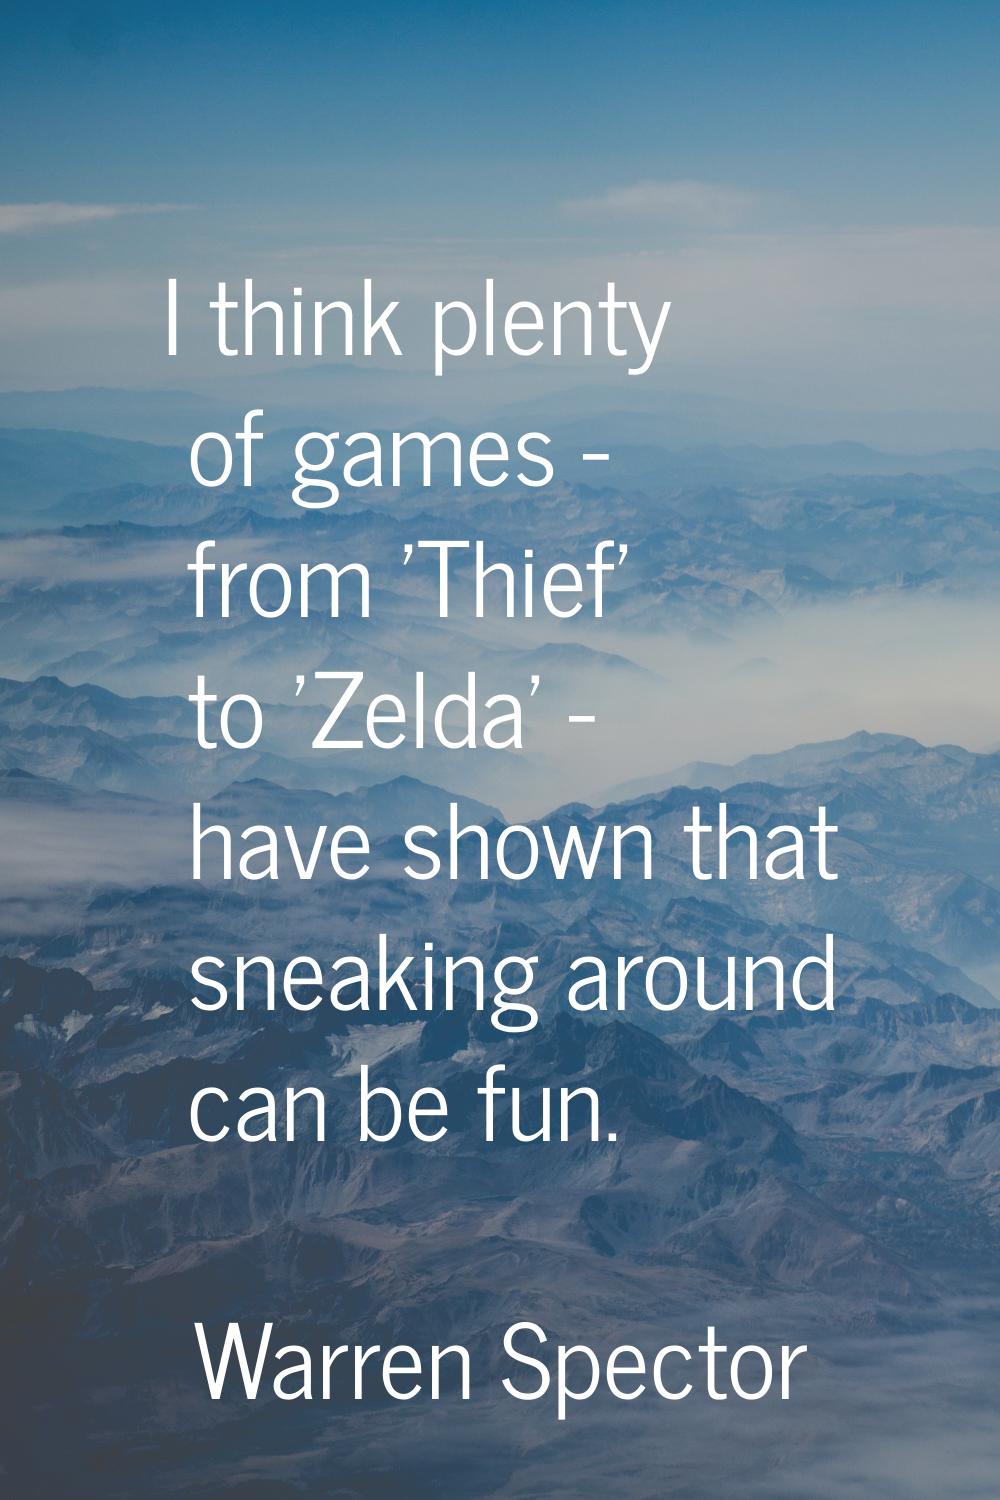 I think plenty of games - from 'Thief' to 'Zelda' - have shown that sneaking around can be fun.